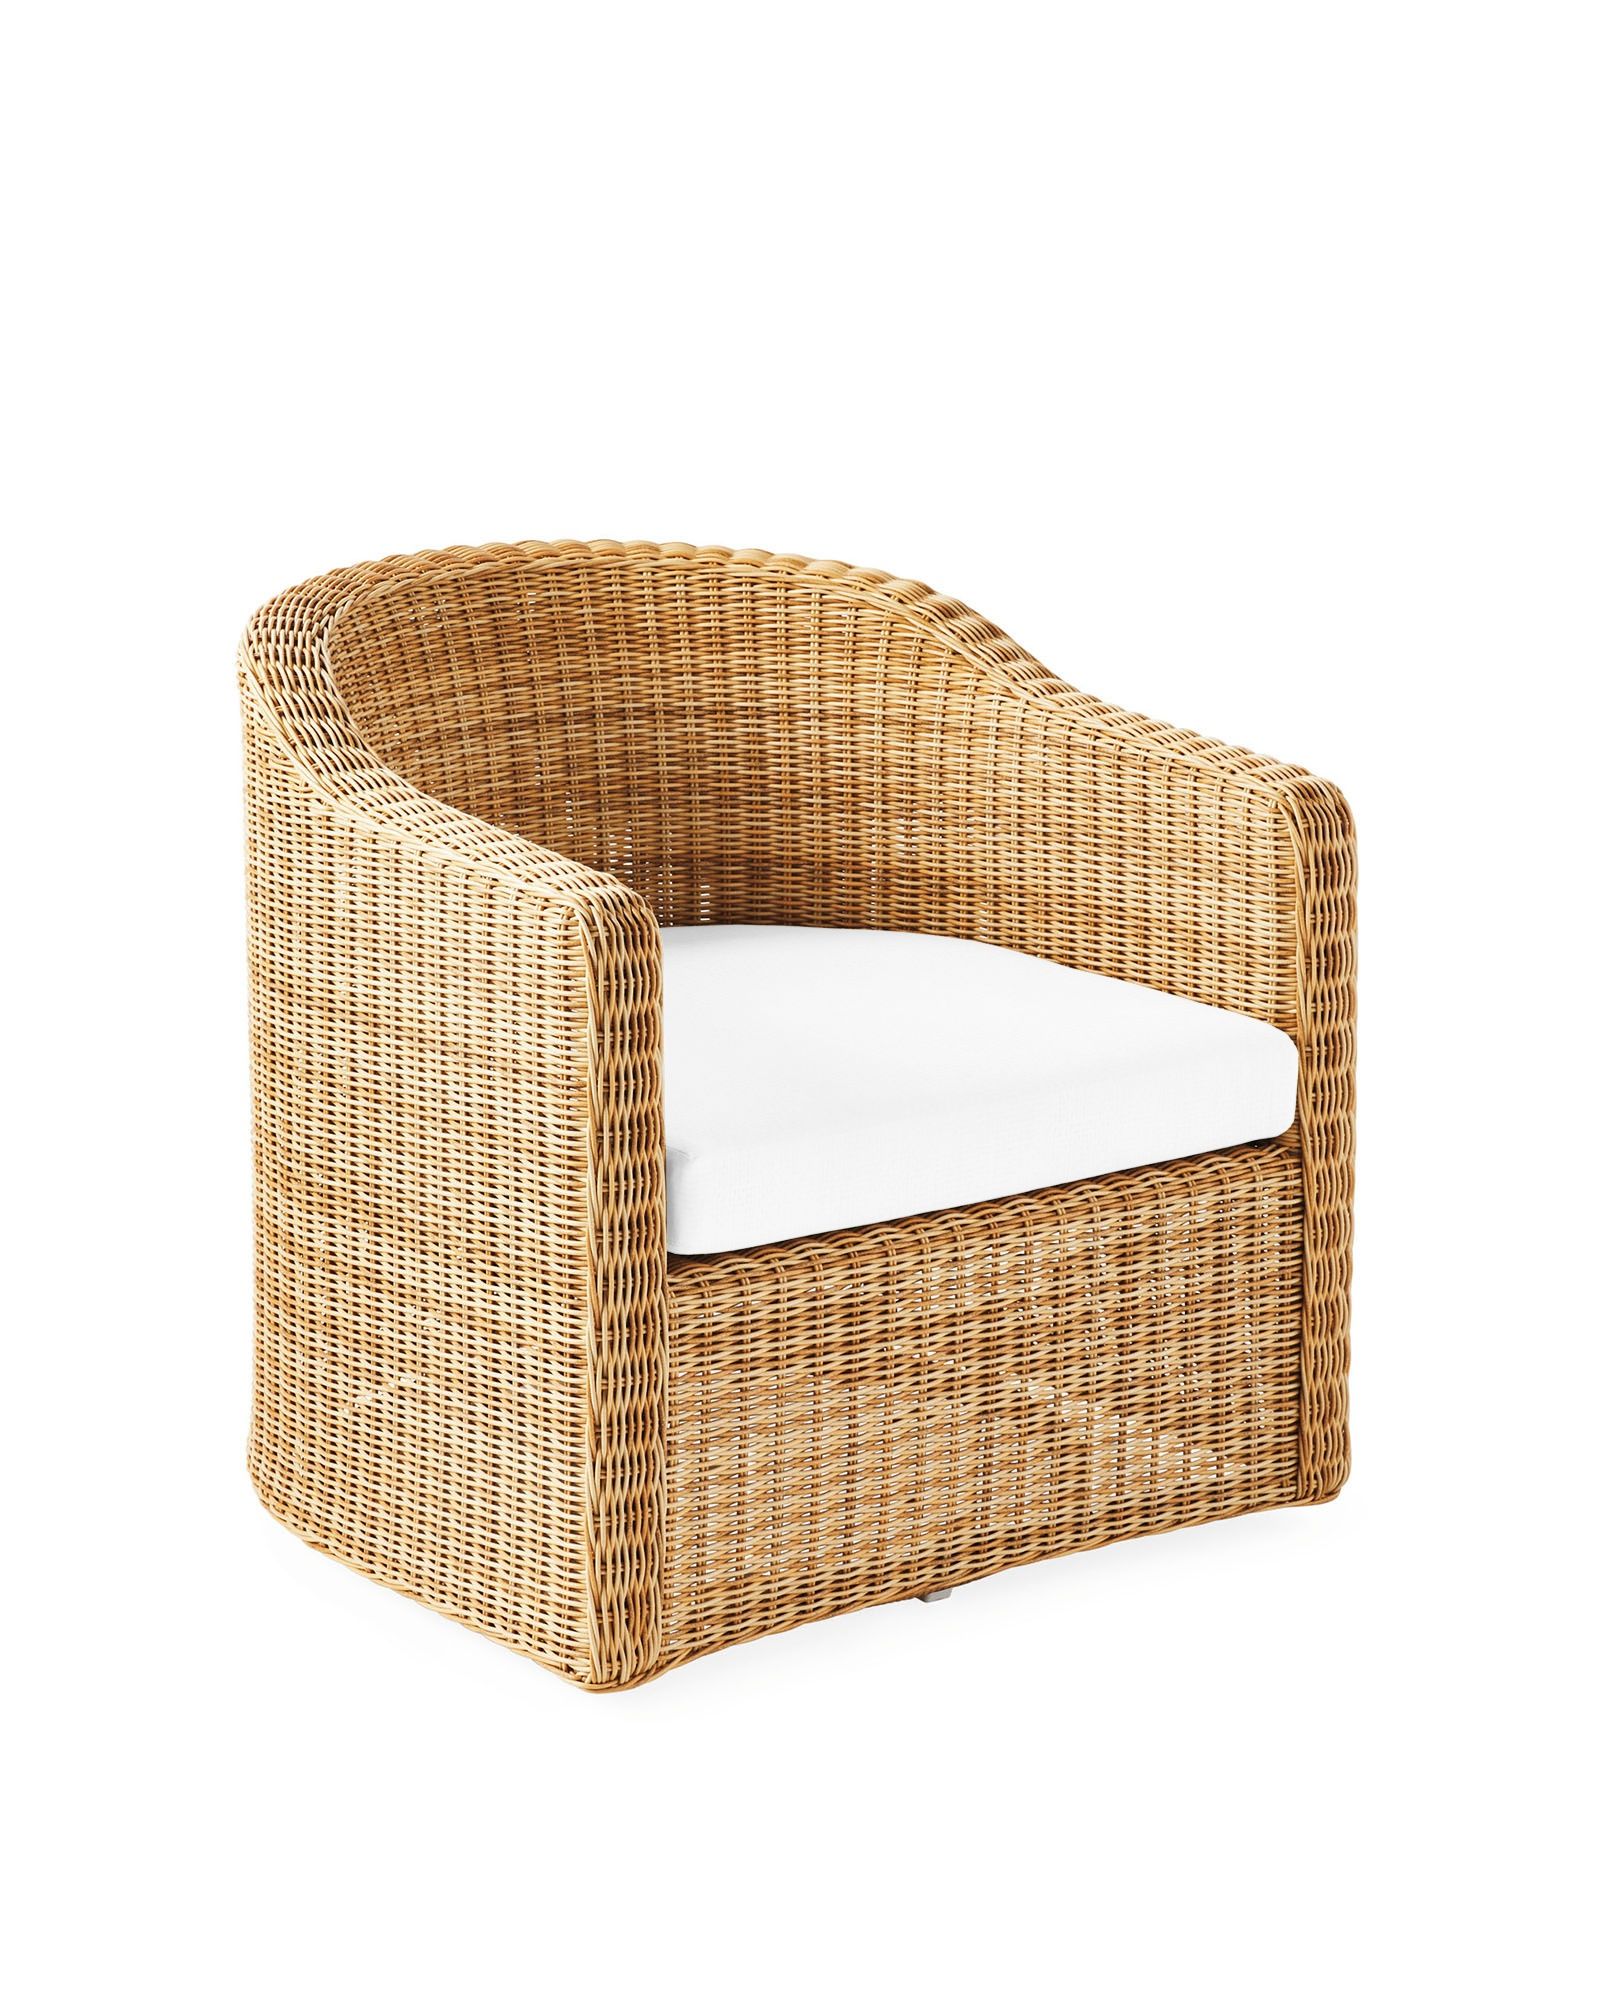 Tofino Swivel Chair | Serena and Lily